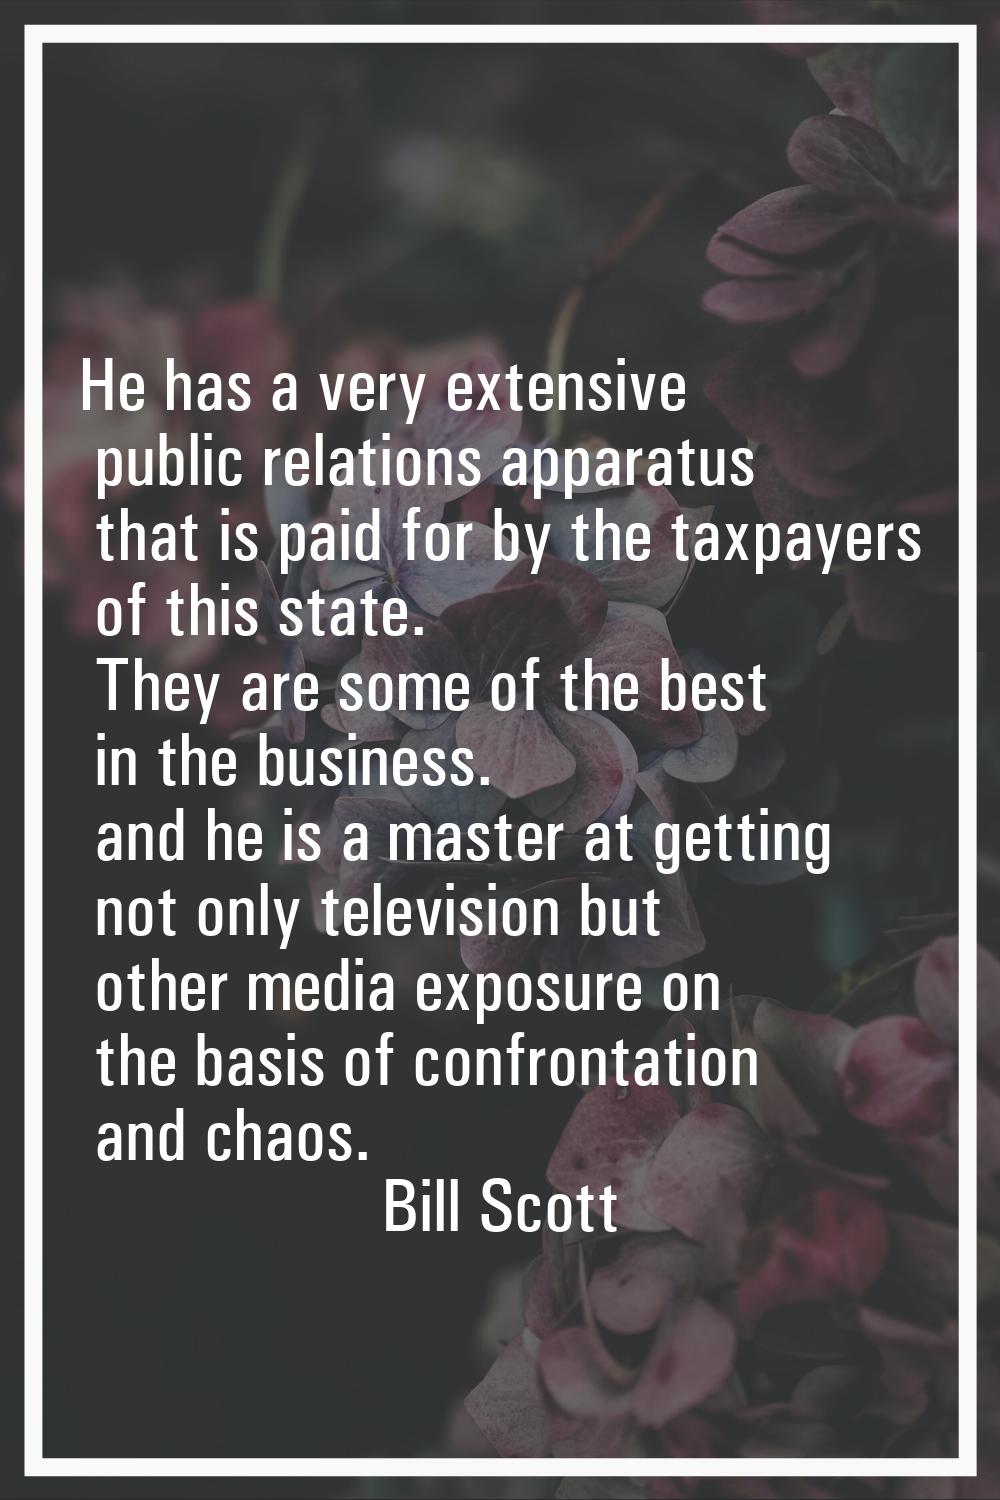 He has a very extensive public relations apparatus that is paid for by the taxpayers of this state.